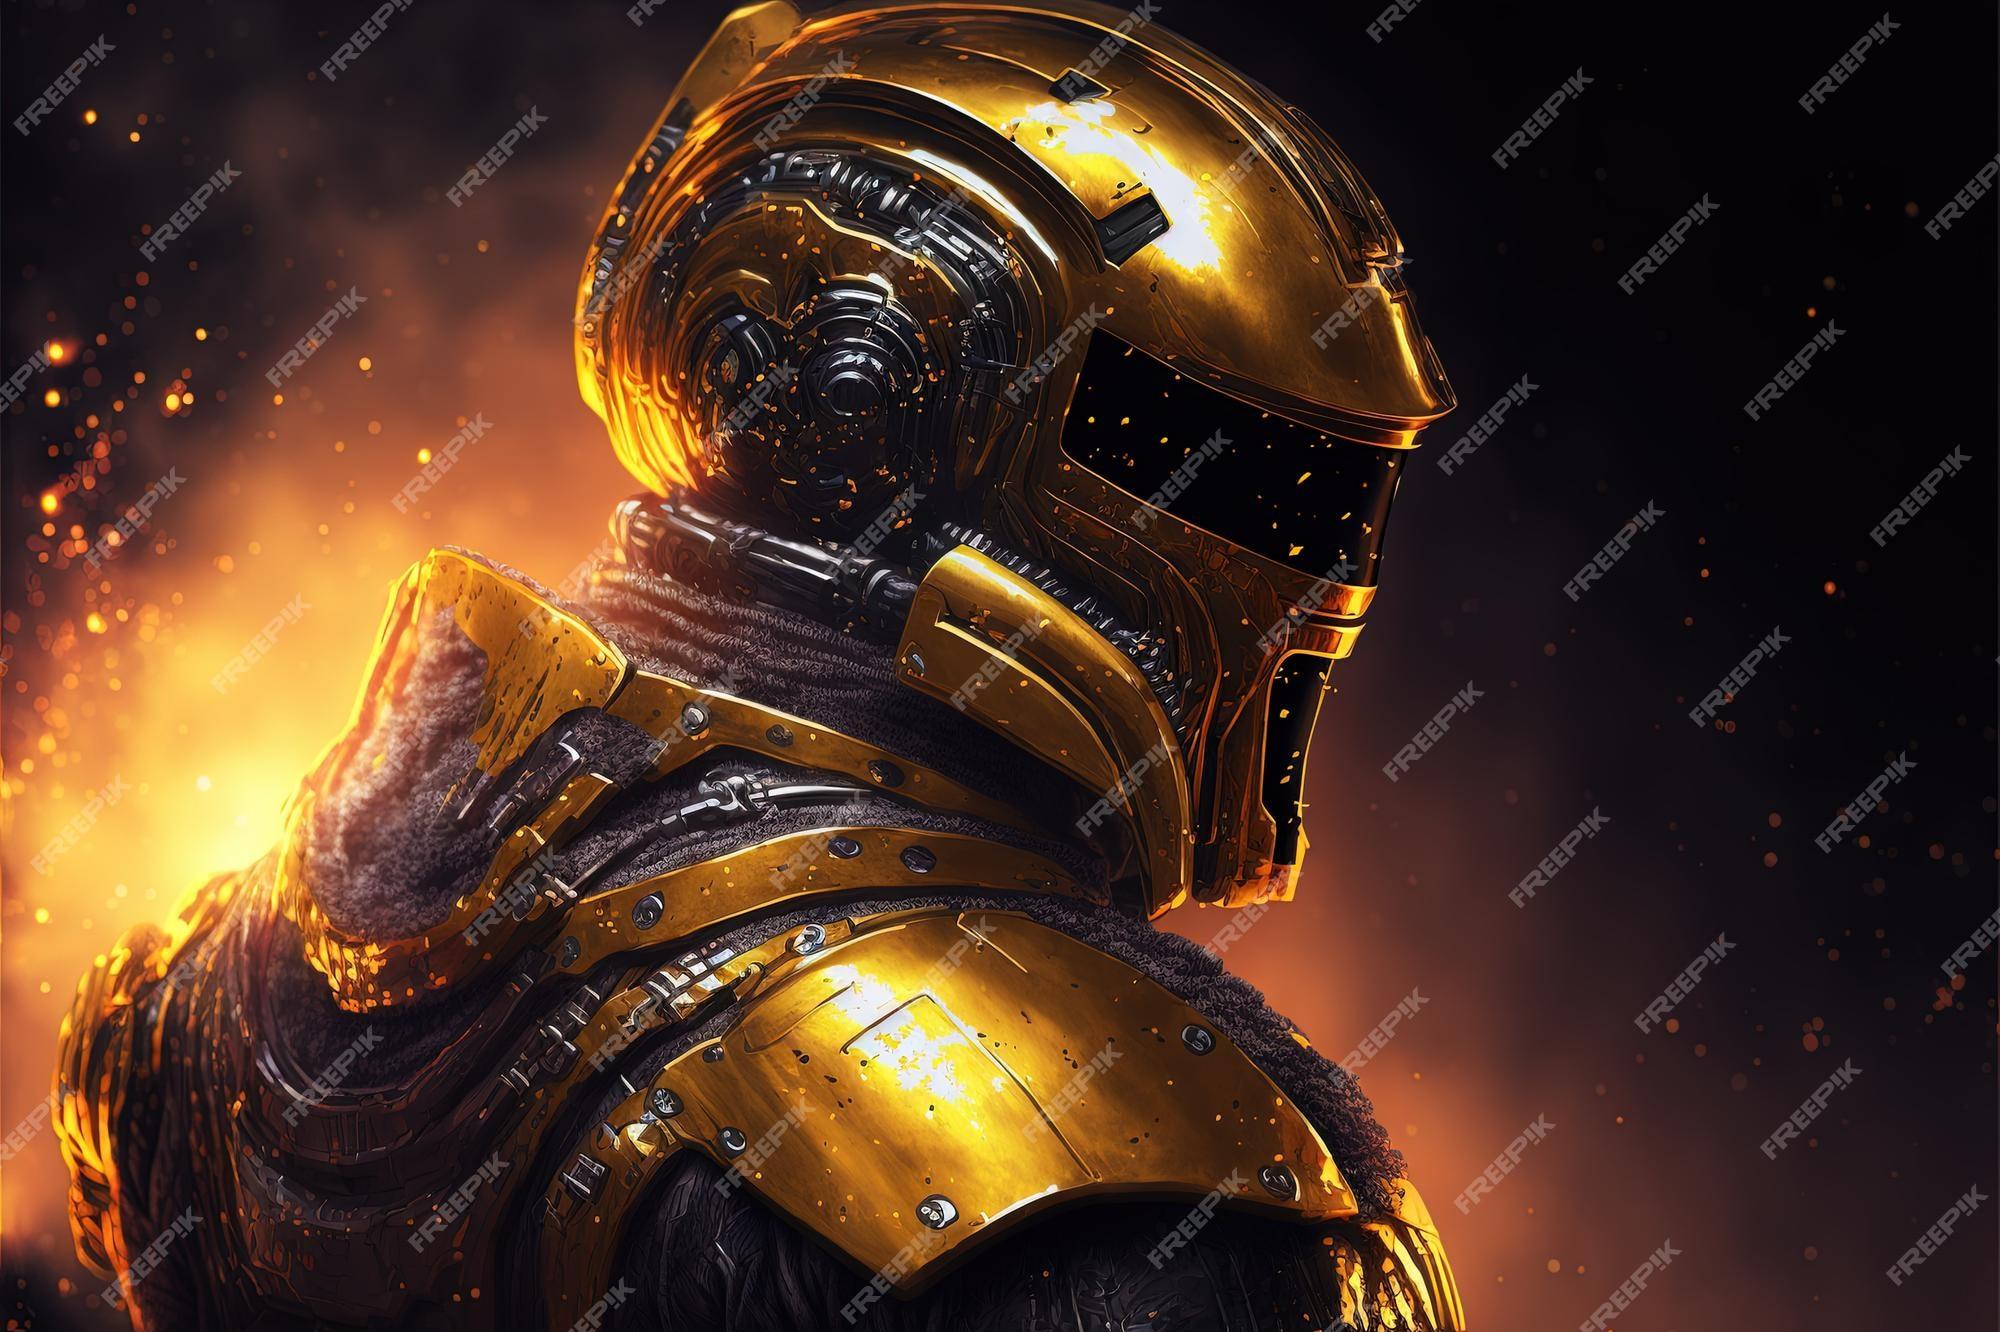 Premium Photo High Quality Picture Elite Space Soldier In Golden